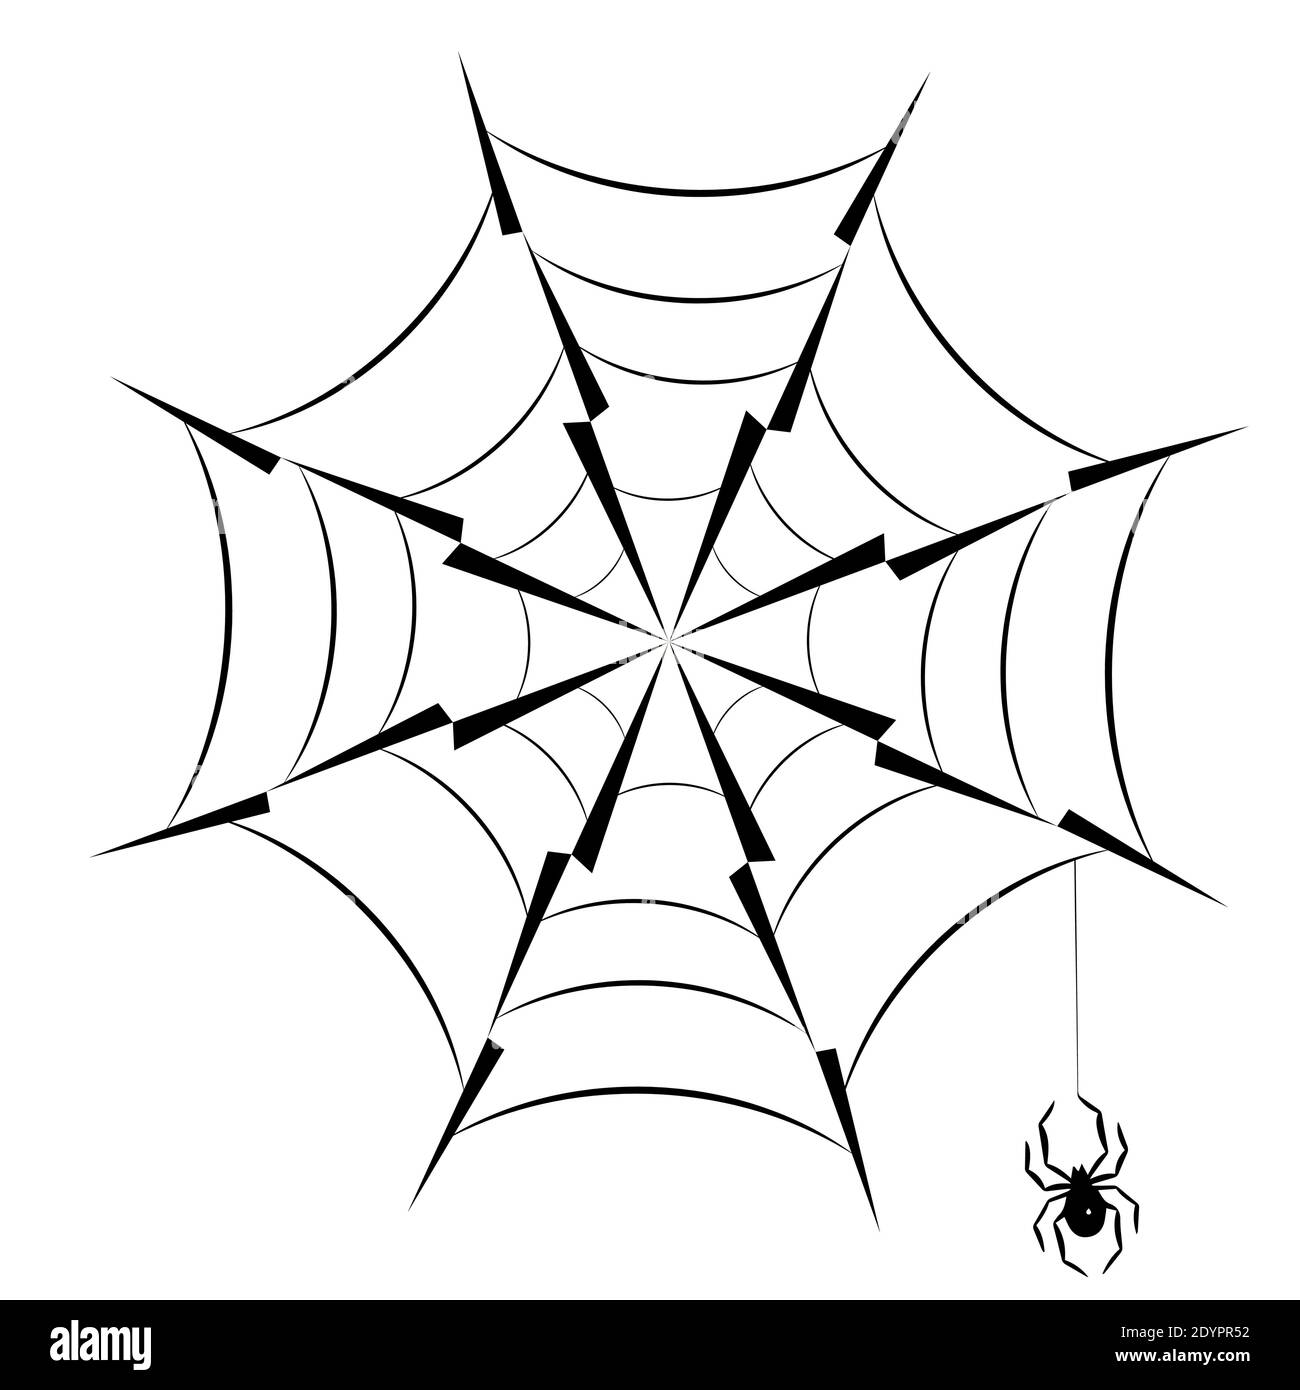 Spider hanging on spider web silhouette icon eps10 vector illustration. Stock Vector